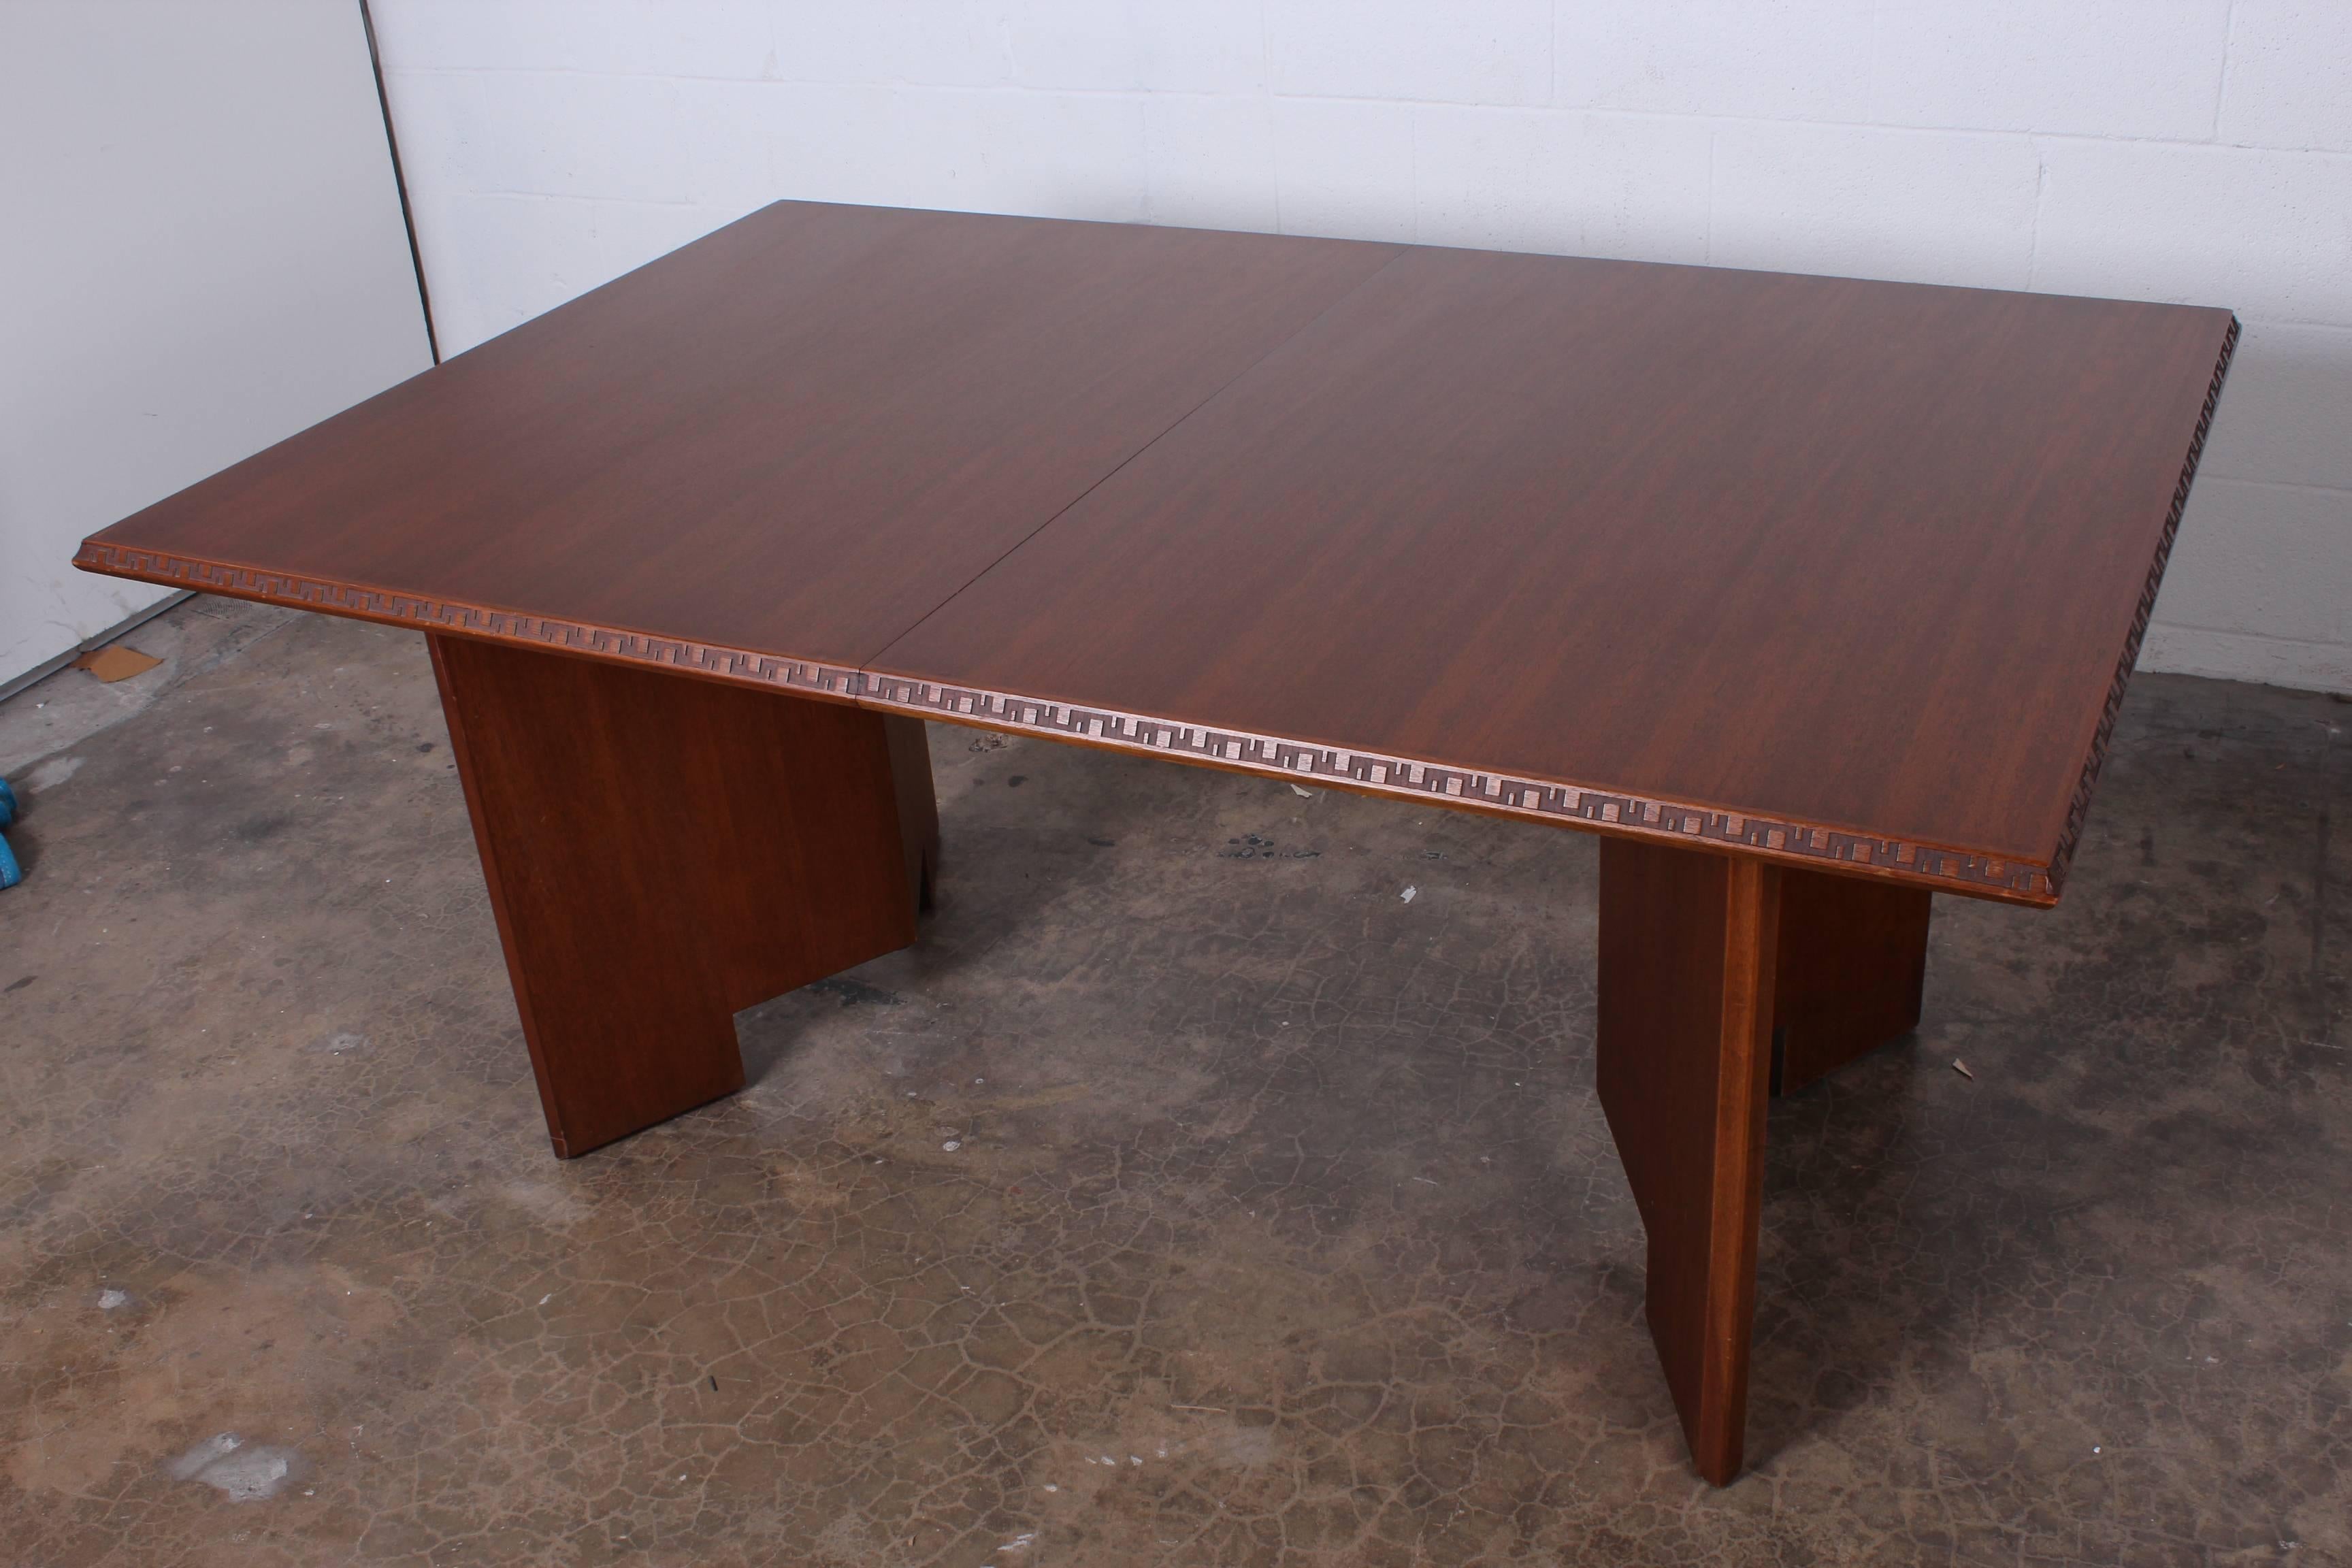 A mahogany dining table with Greek key Taliesin detail. Designed by Frank Lloyd Wright for Henredon. Table measures 5'4 without leaves and comes with two 18